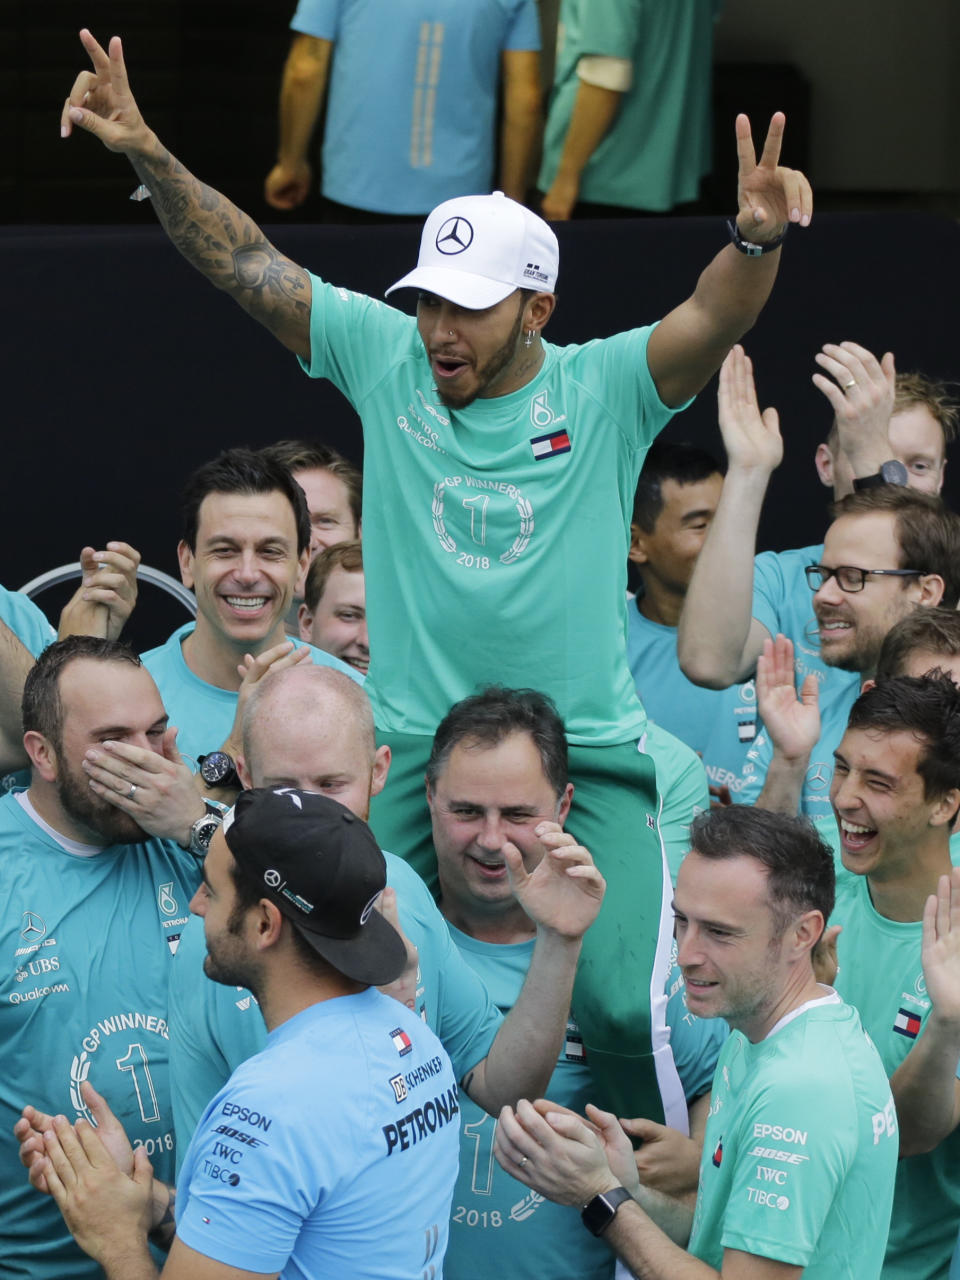 Lewis Hamilton, of Britain, celebrates with members of the Mercedes Benz team after the Brazilian Formula One Grand Prix at the Interlagos race track in Sao Paulo, Brazil, Sunday, Nov. 11, 2018. Five-time world champion Lewis Hamilton won the race helping his team to take the constructors' title. (AP Photo/Nelson Antoine)